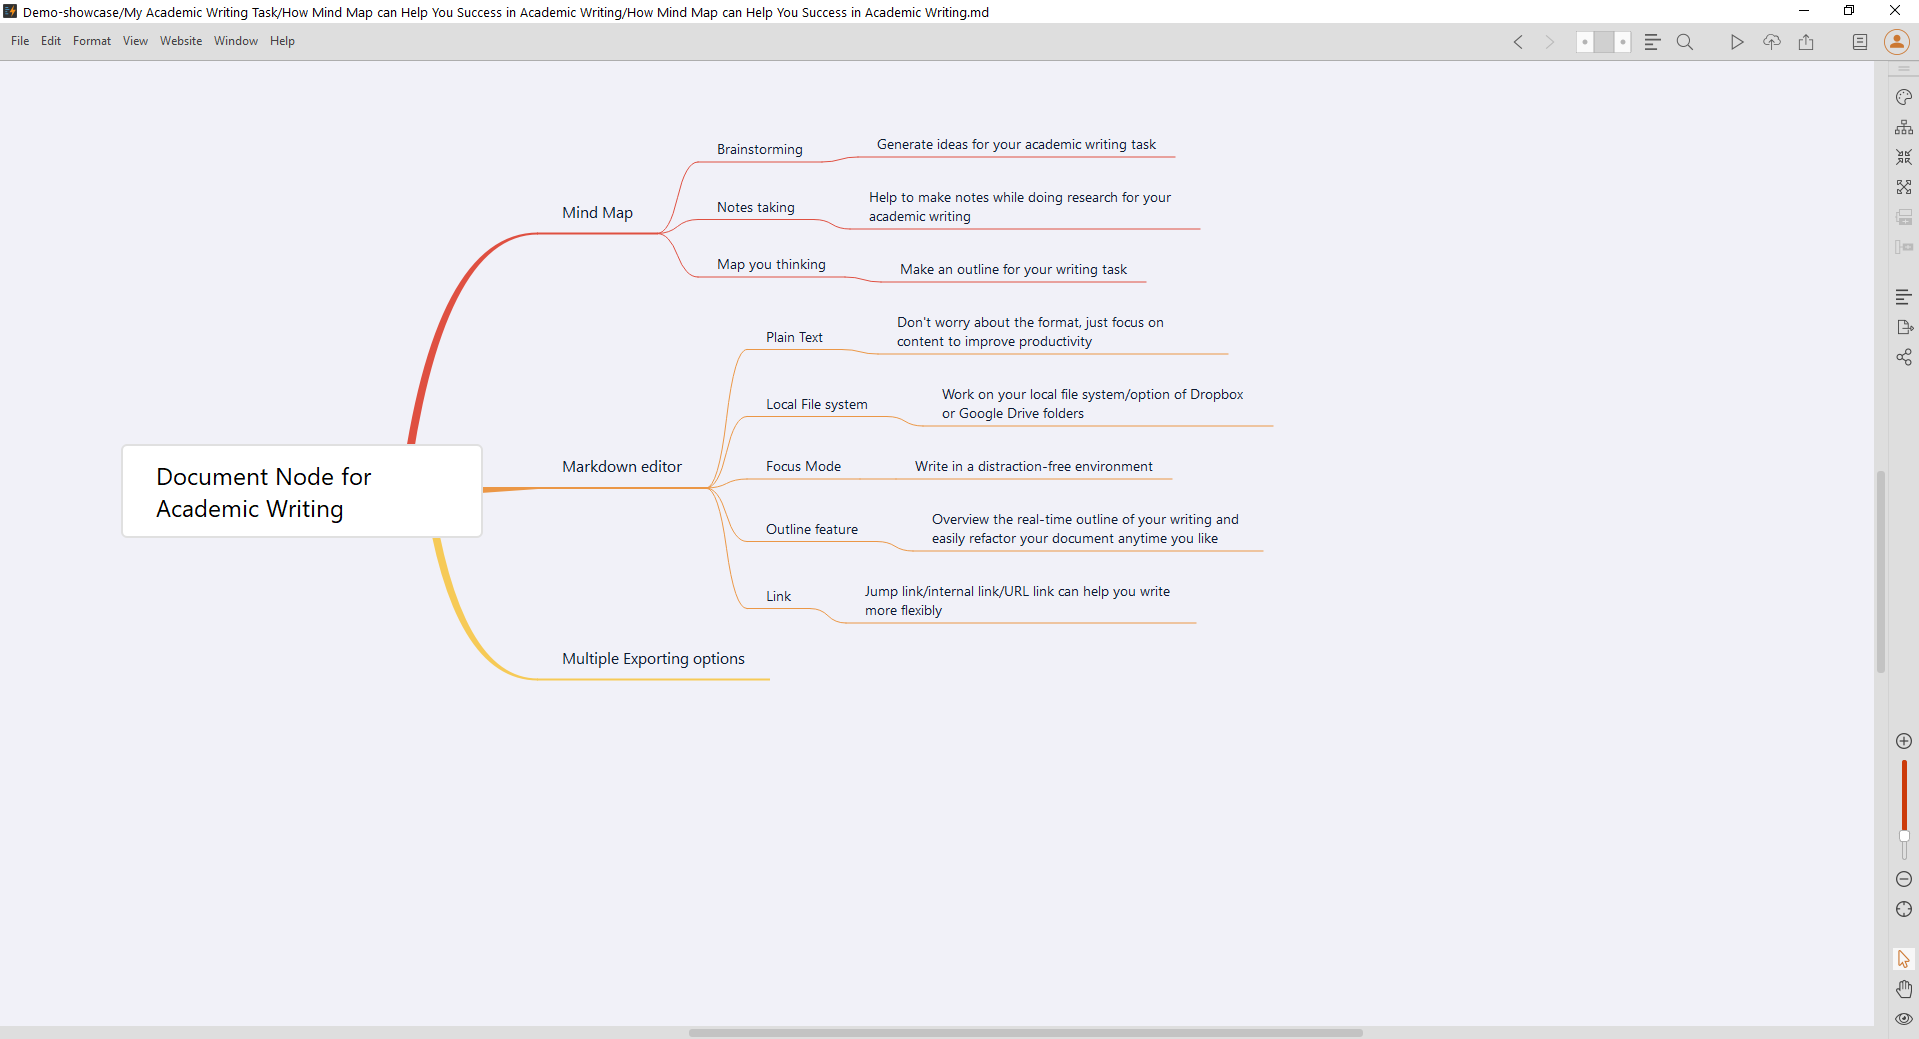 generate ideas with Mind Map